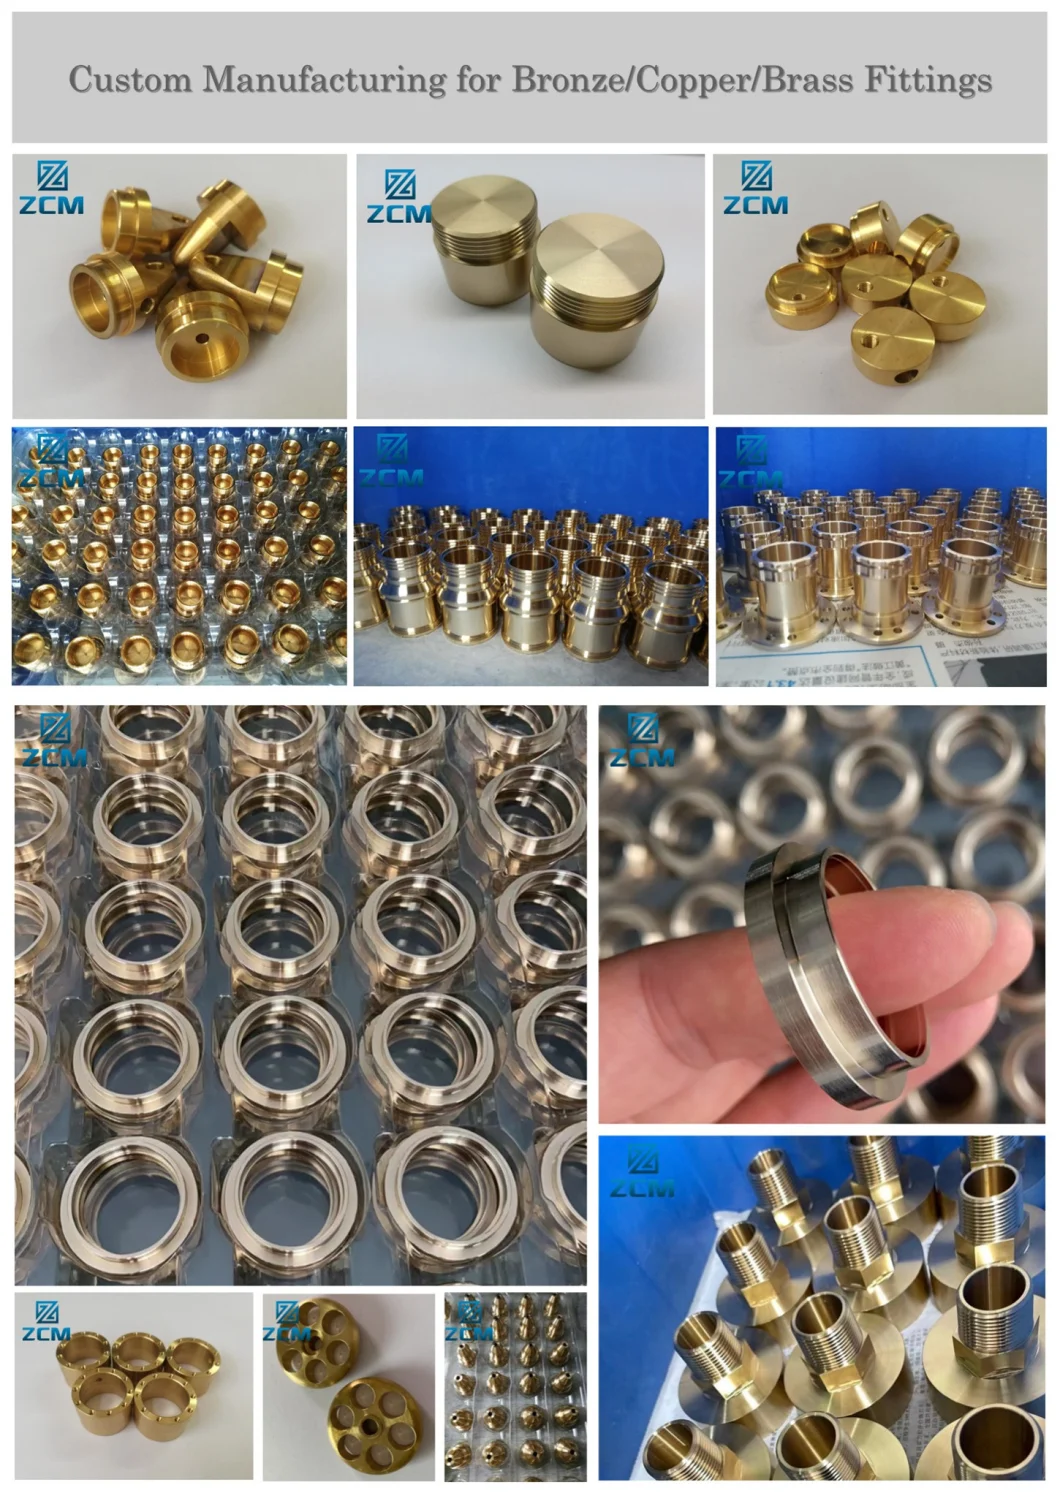 Shenzhen Competitive Price Custom Wire Cut/ Wire EDM Metal Precision Hardening/Quenching Machined Stainless Steel Alloy/Aluminum/Brass Gear Parts